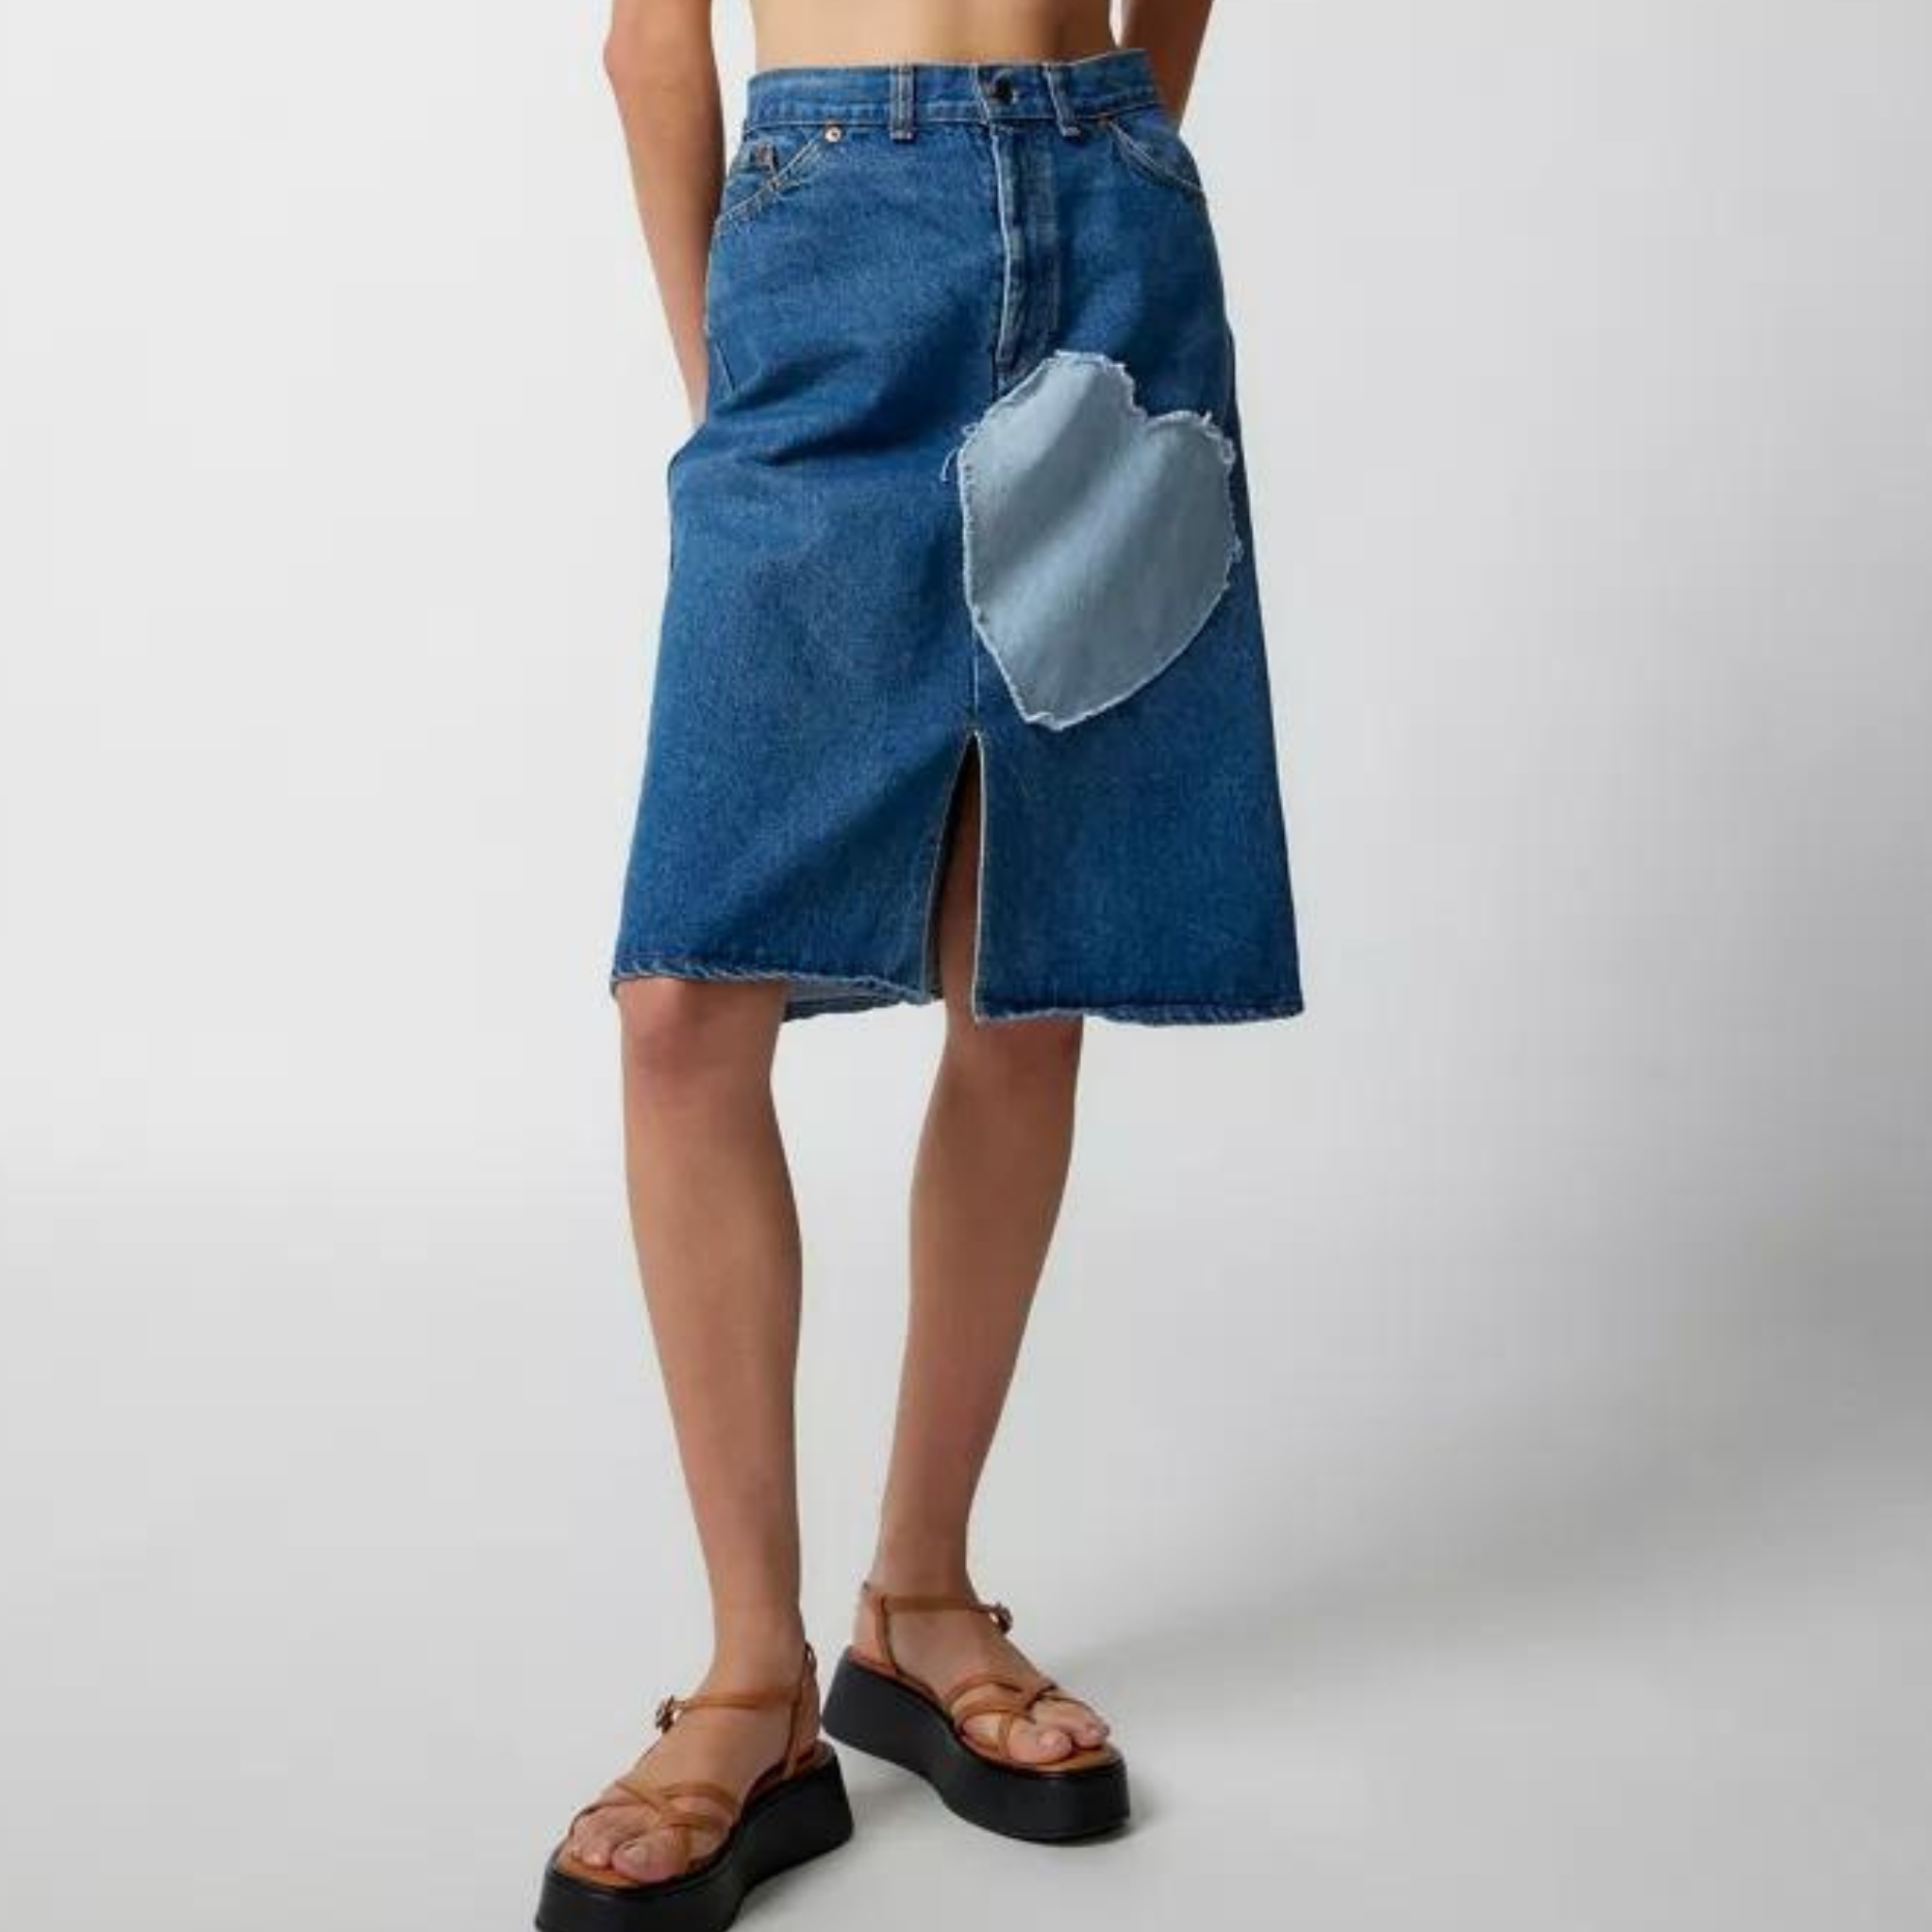 Urban Outfitters Heart Patch Denim Midi Skirt